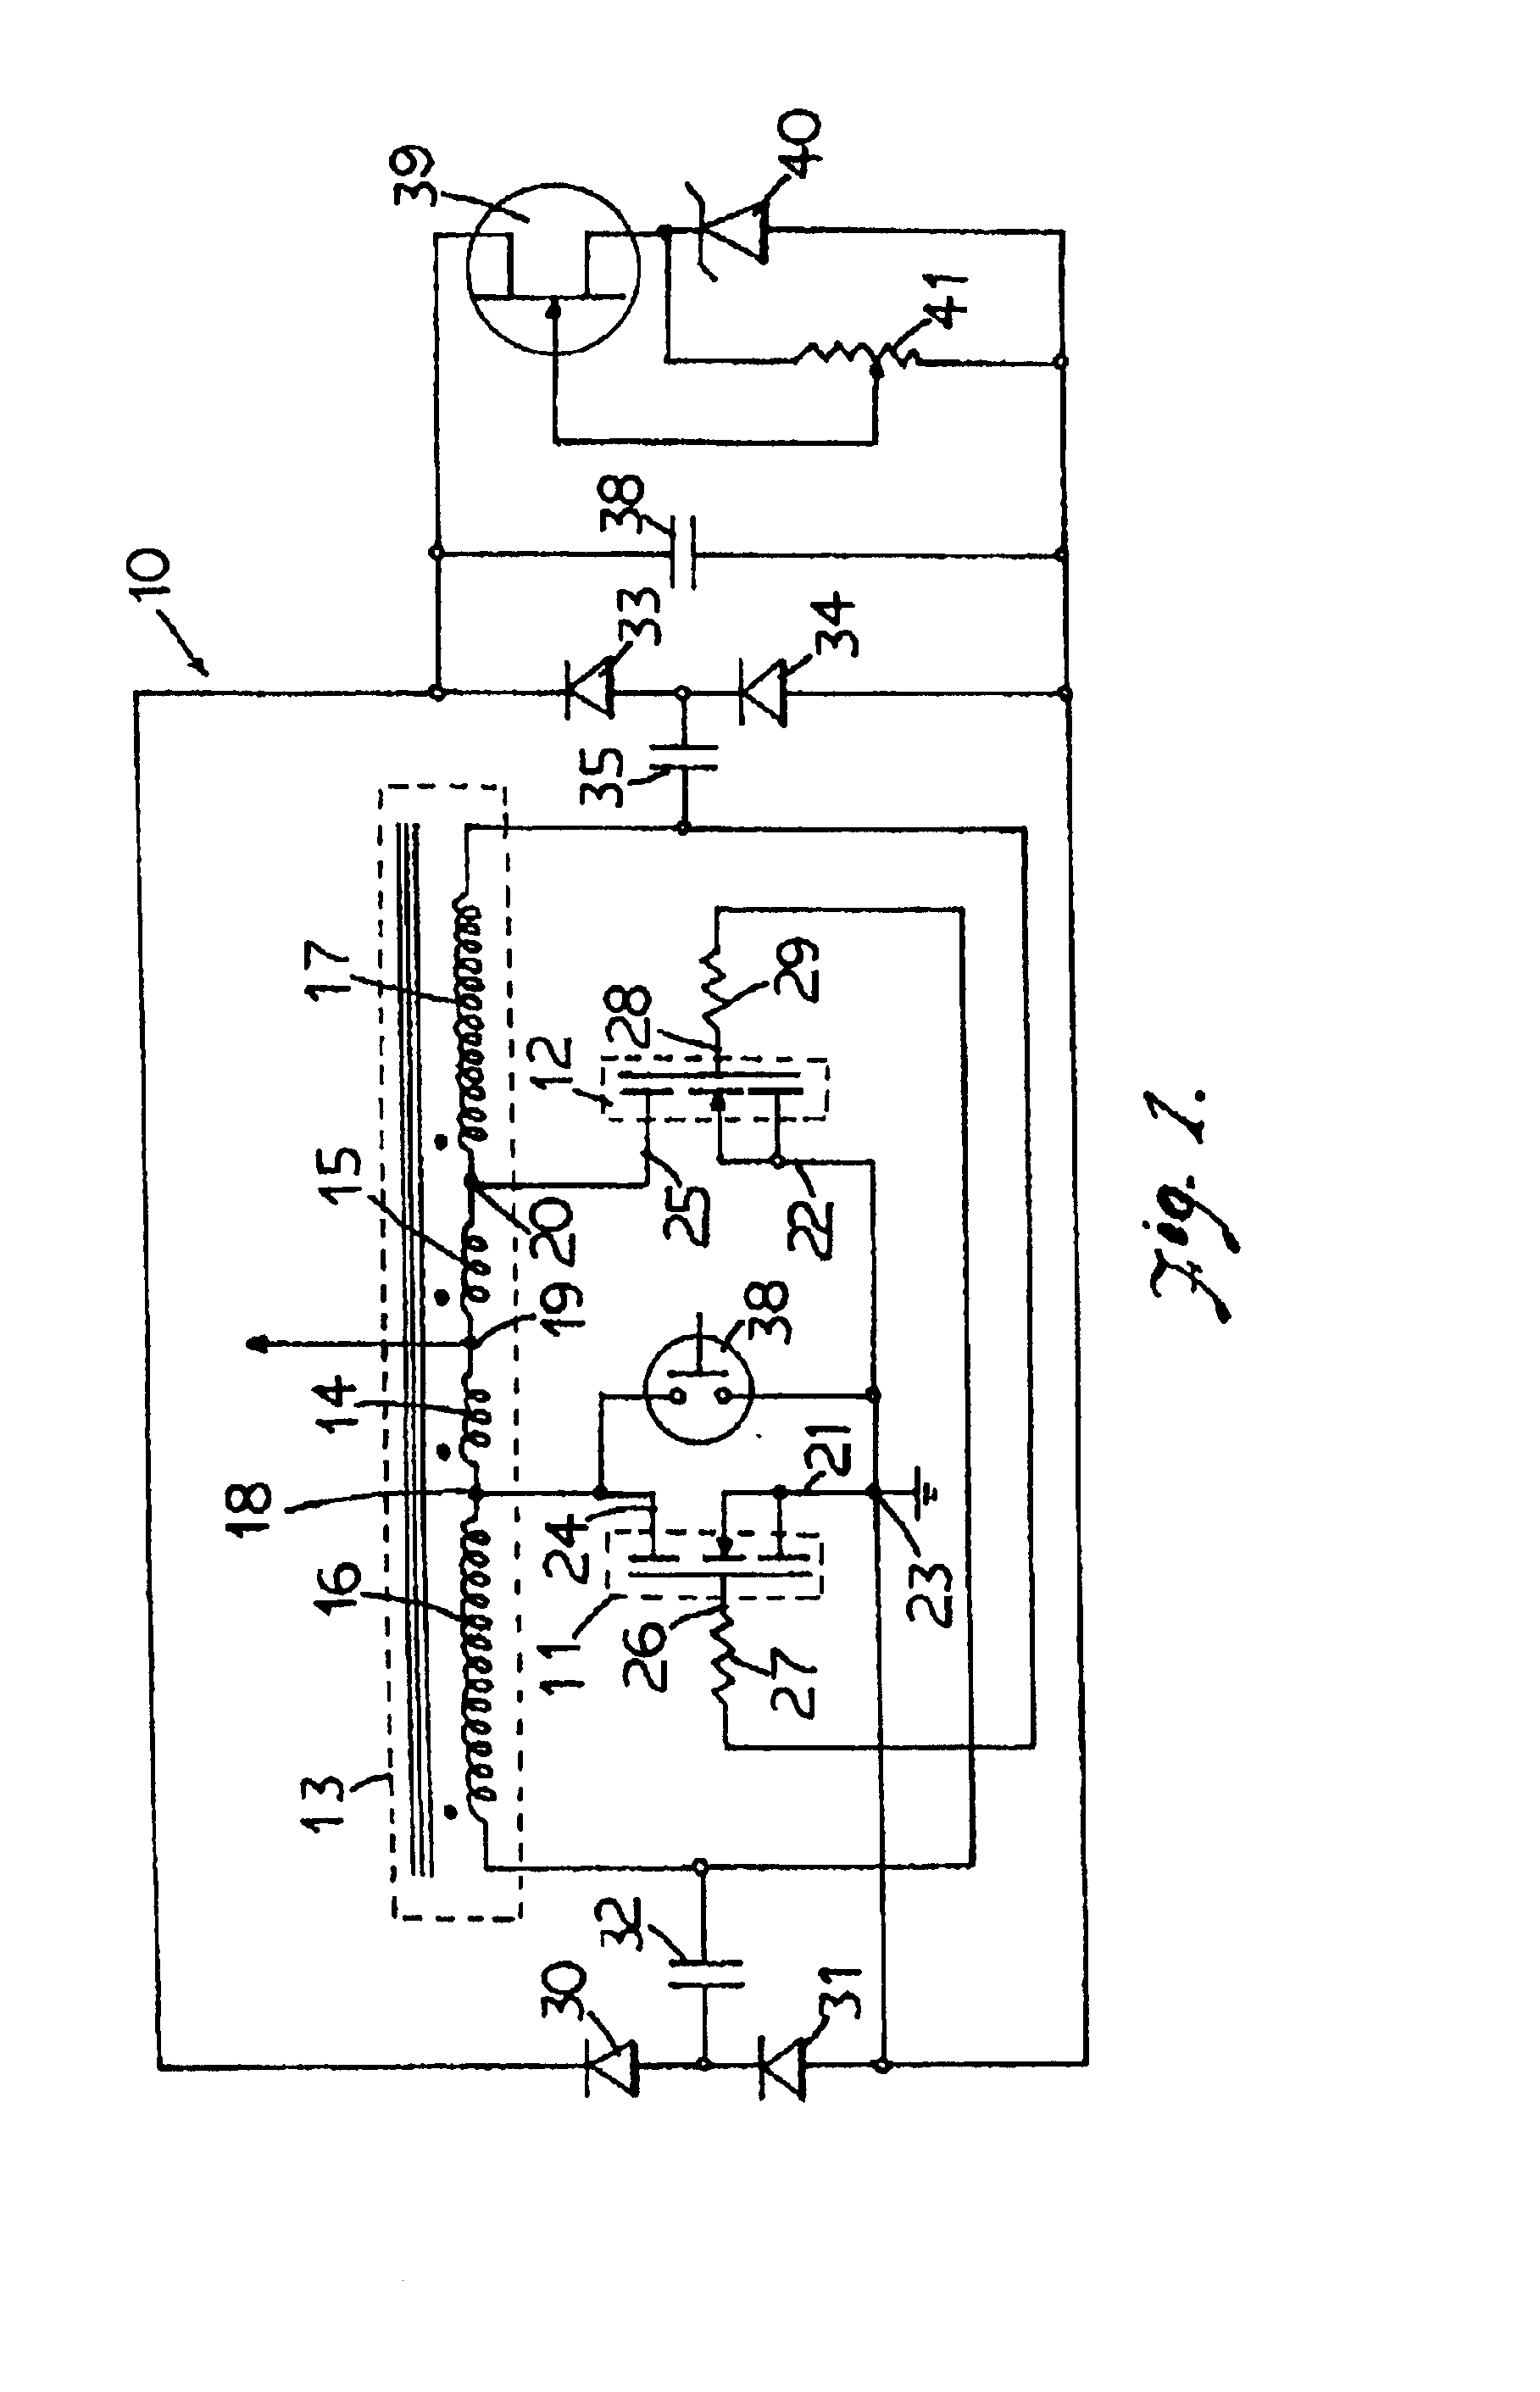 Device for increasing power of extremely low DC voltage